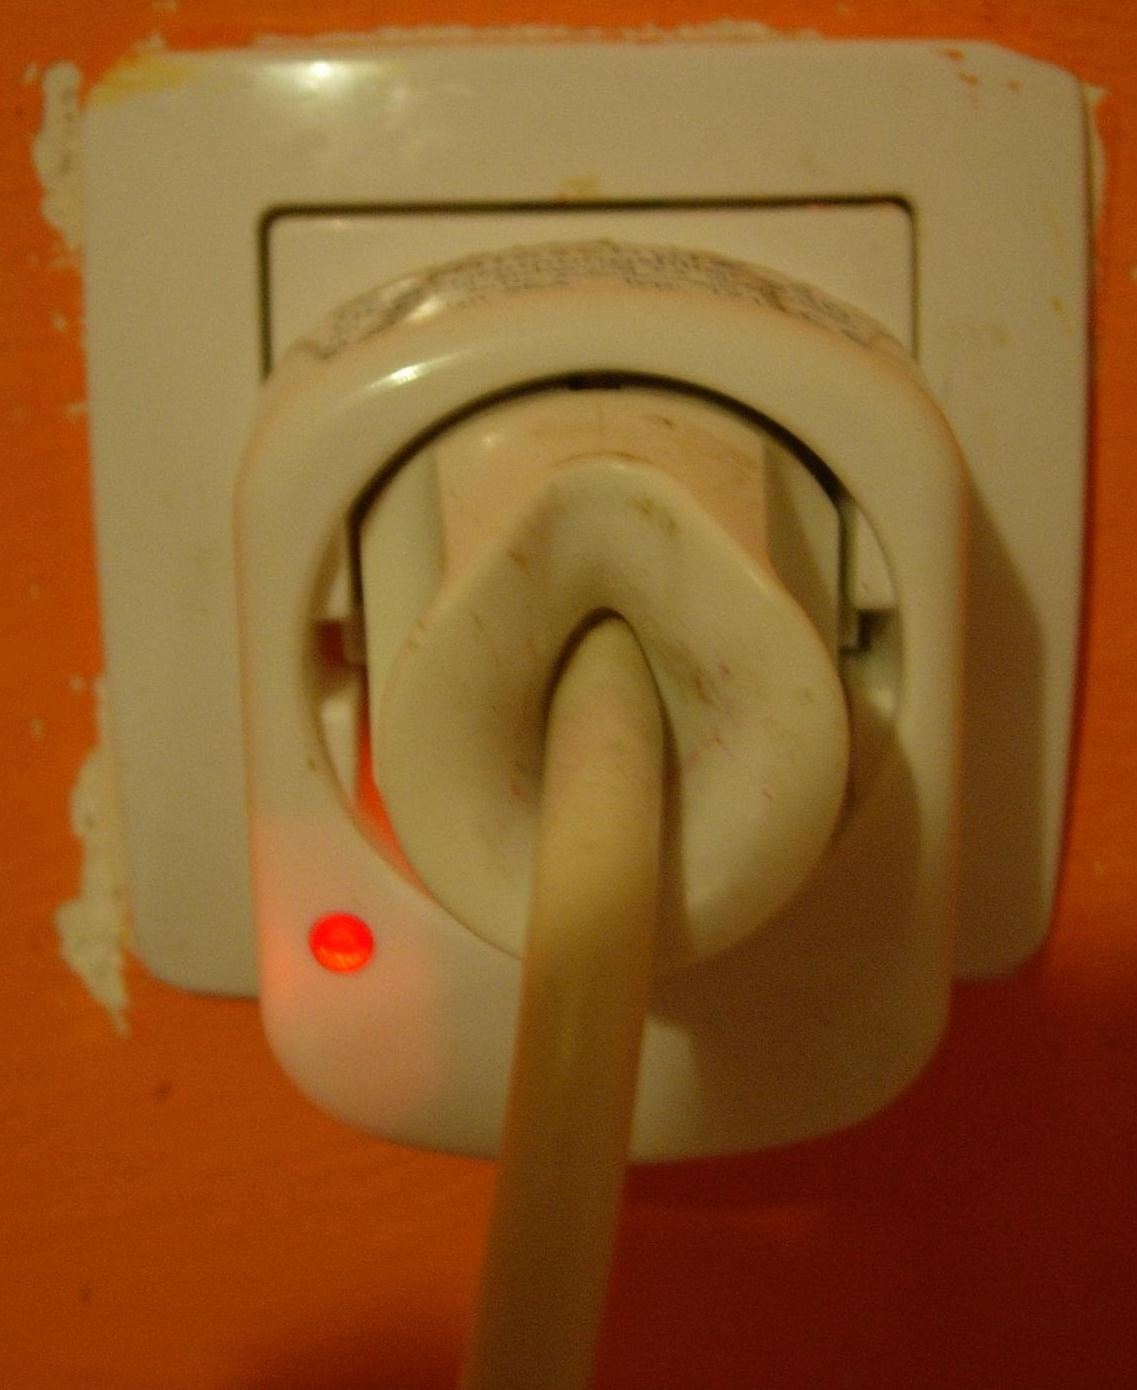 How to Place Your Electrical Socket Safely in the Wall If It Was Pulled Out